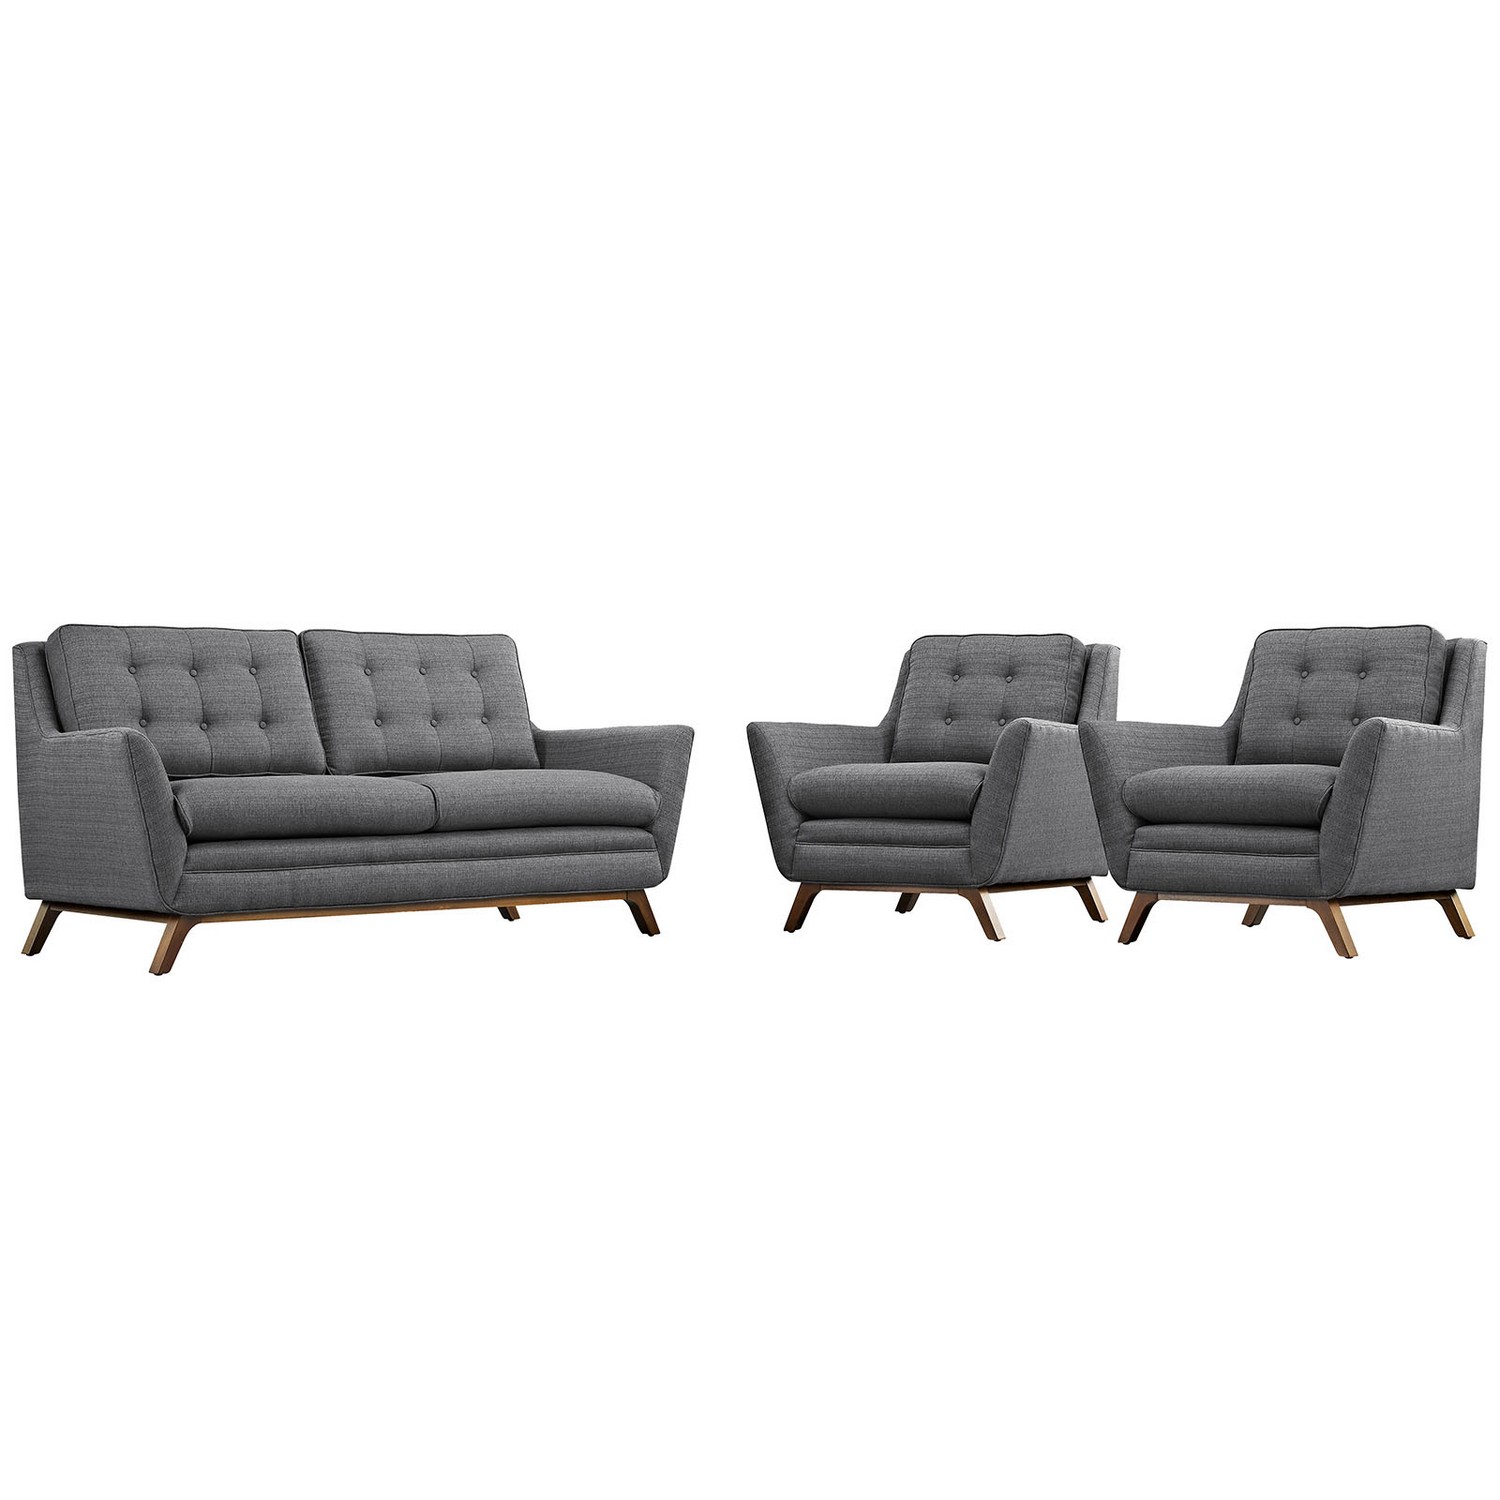 Modway Beguile 3 Piece Fabric Living Room Set - Gray